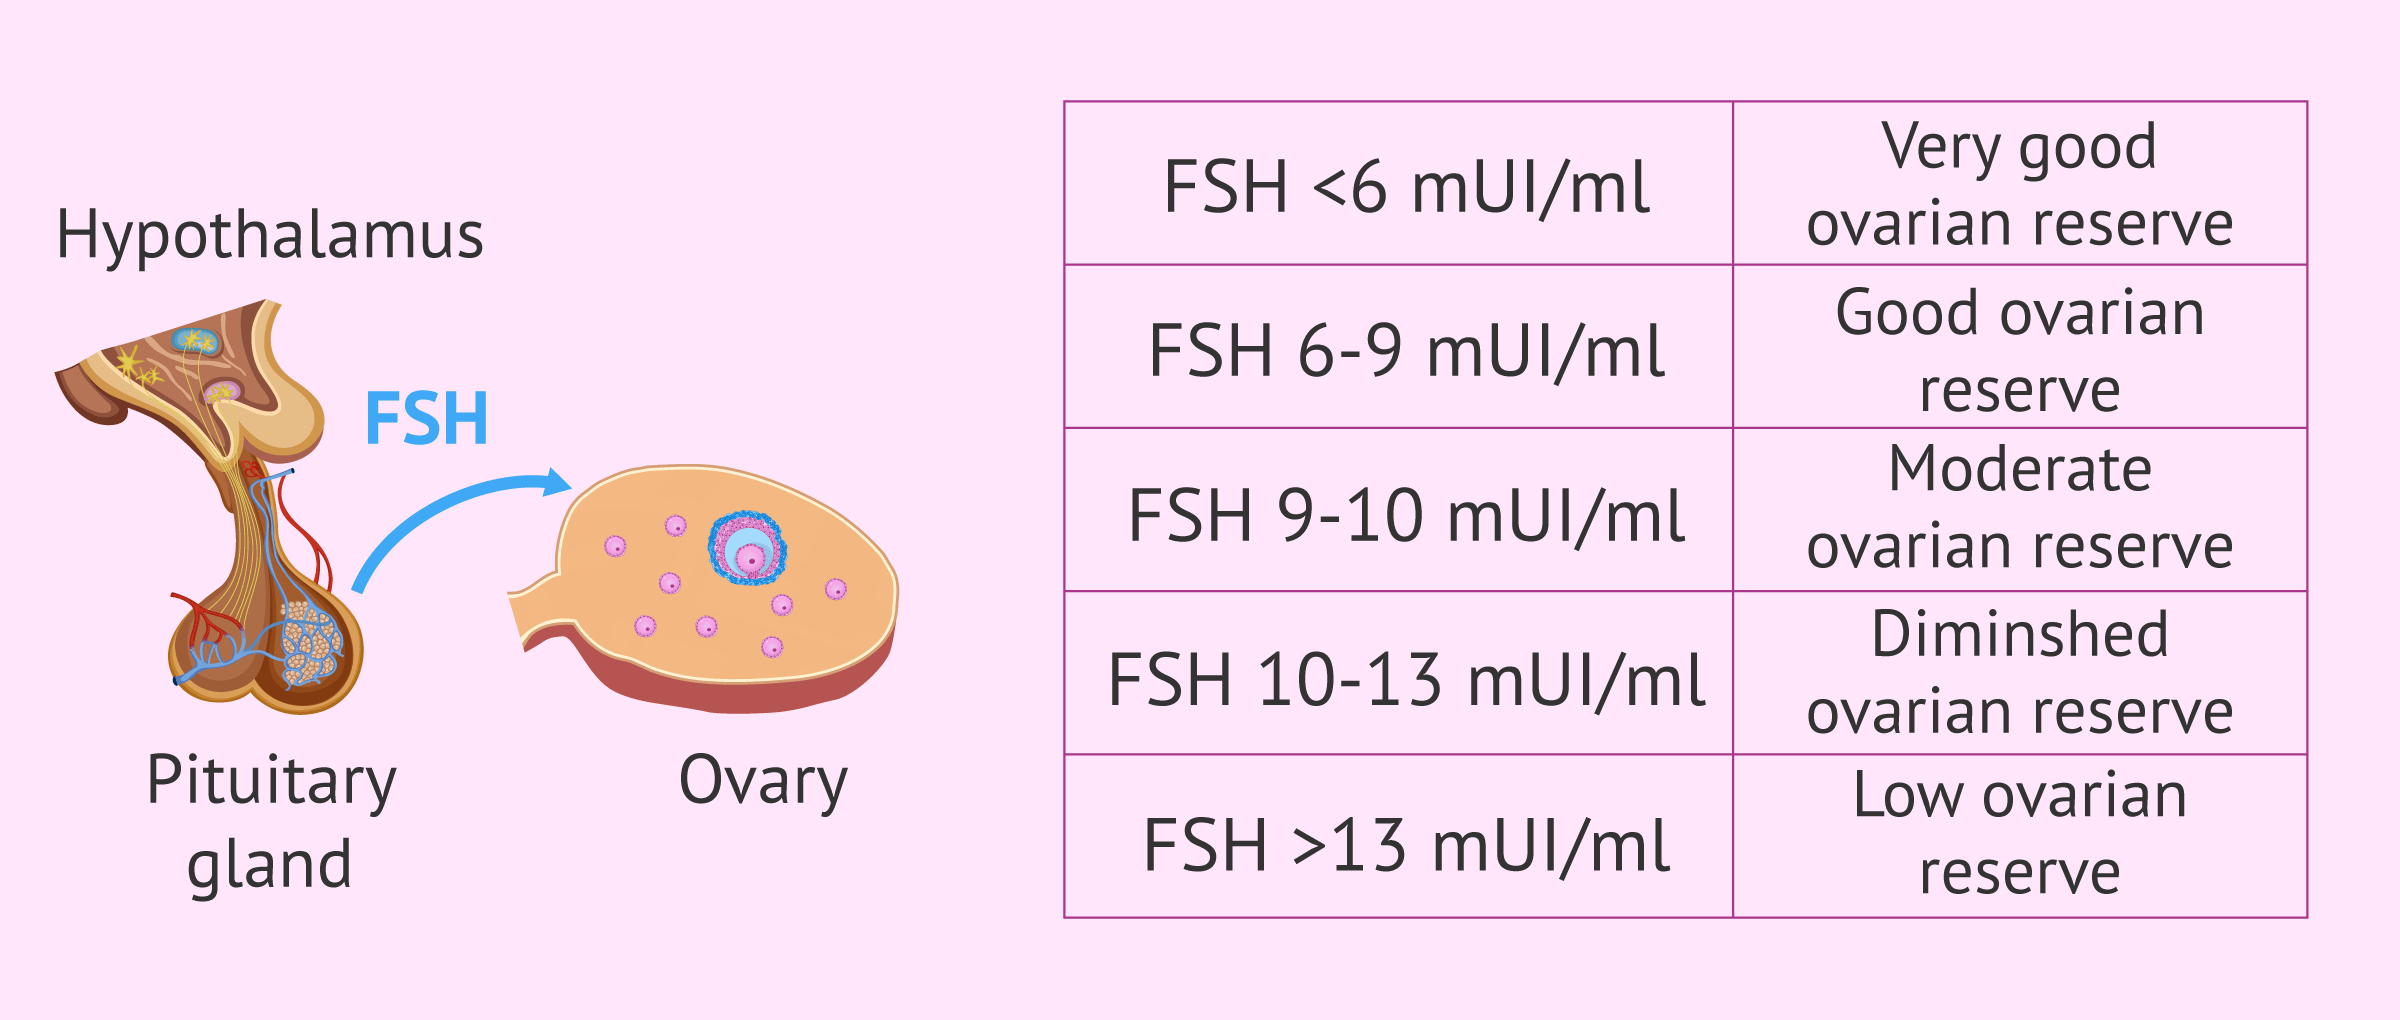 Relationship between FSH levels and ovarian reserve